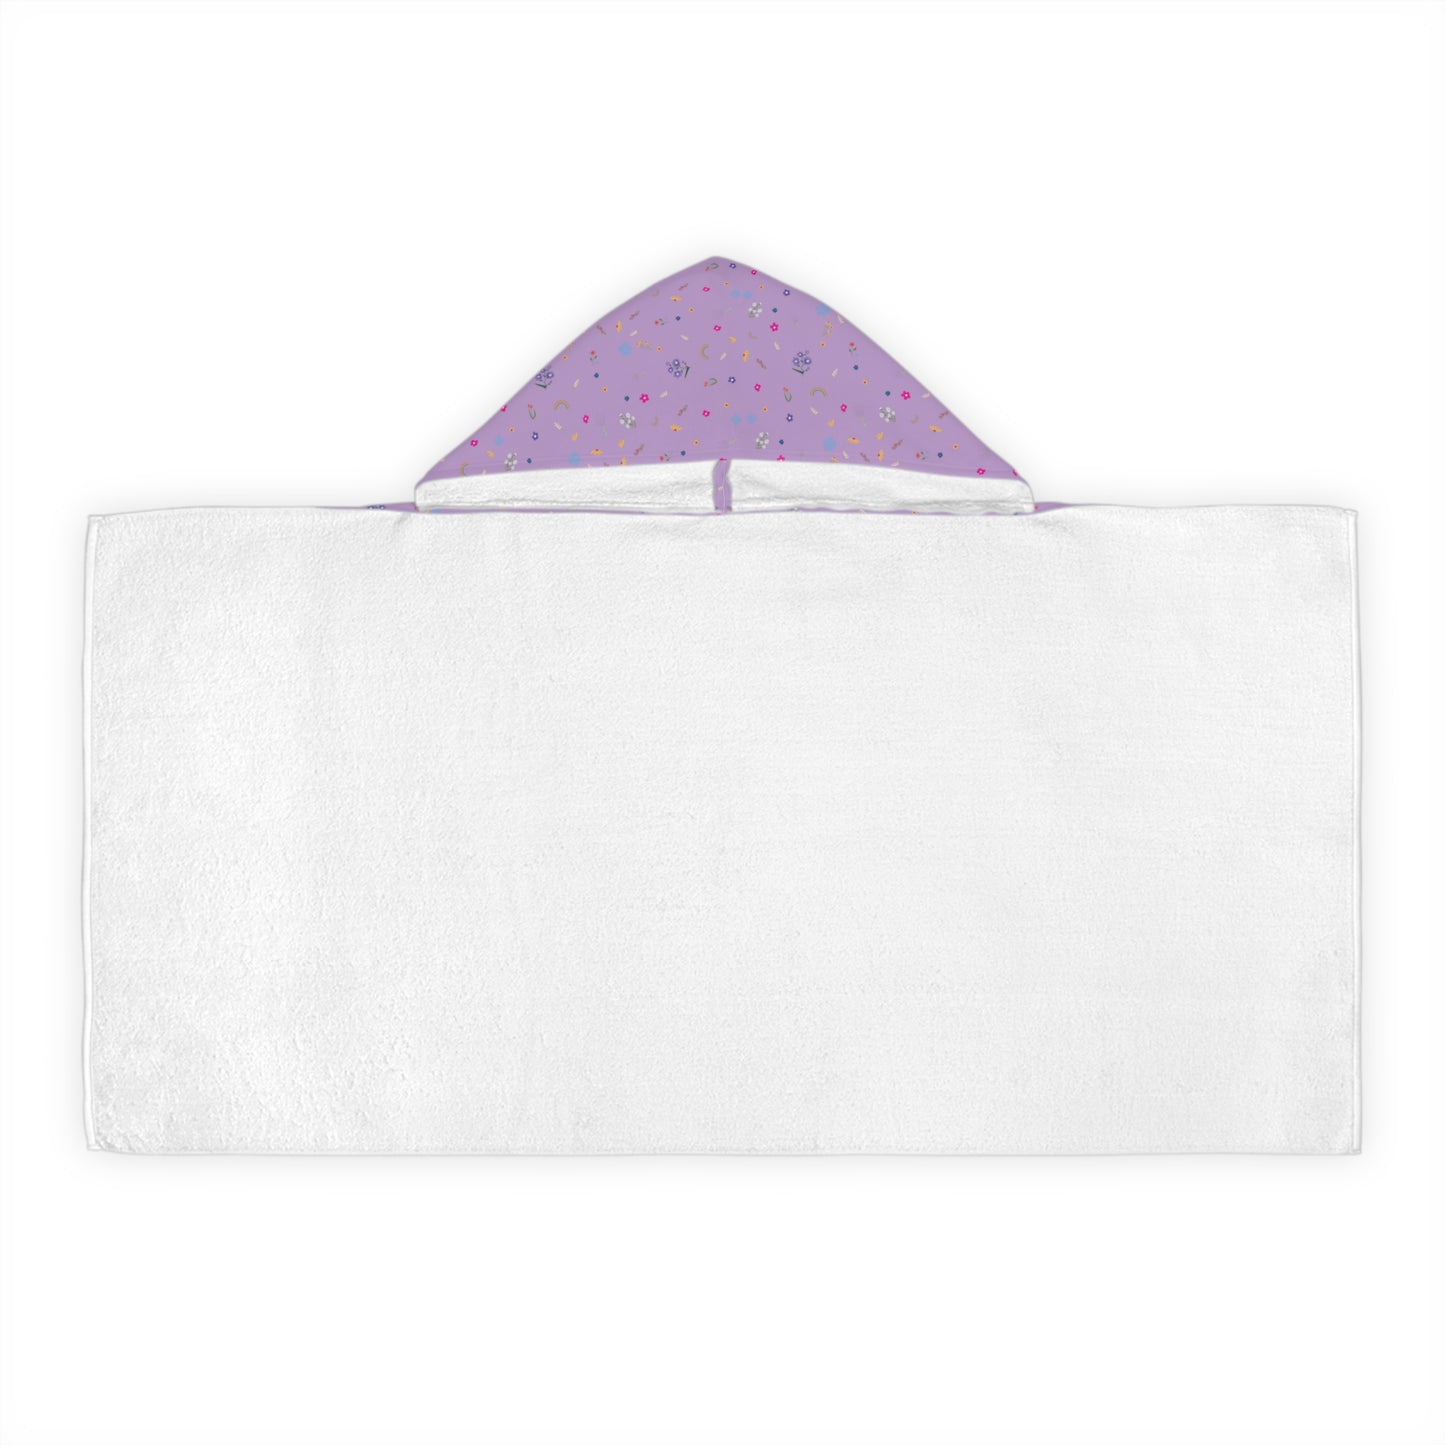 Kid's Hooded Towel- Turtle's Fly Over the Rainbow (Lavender)